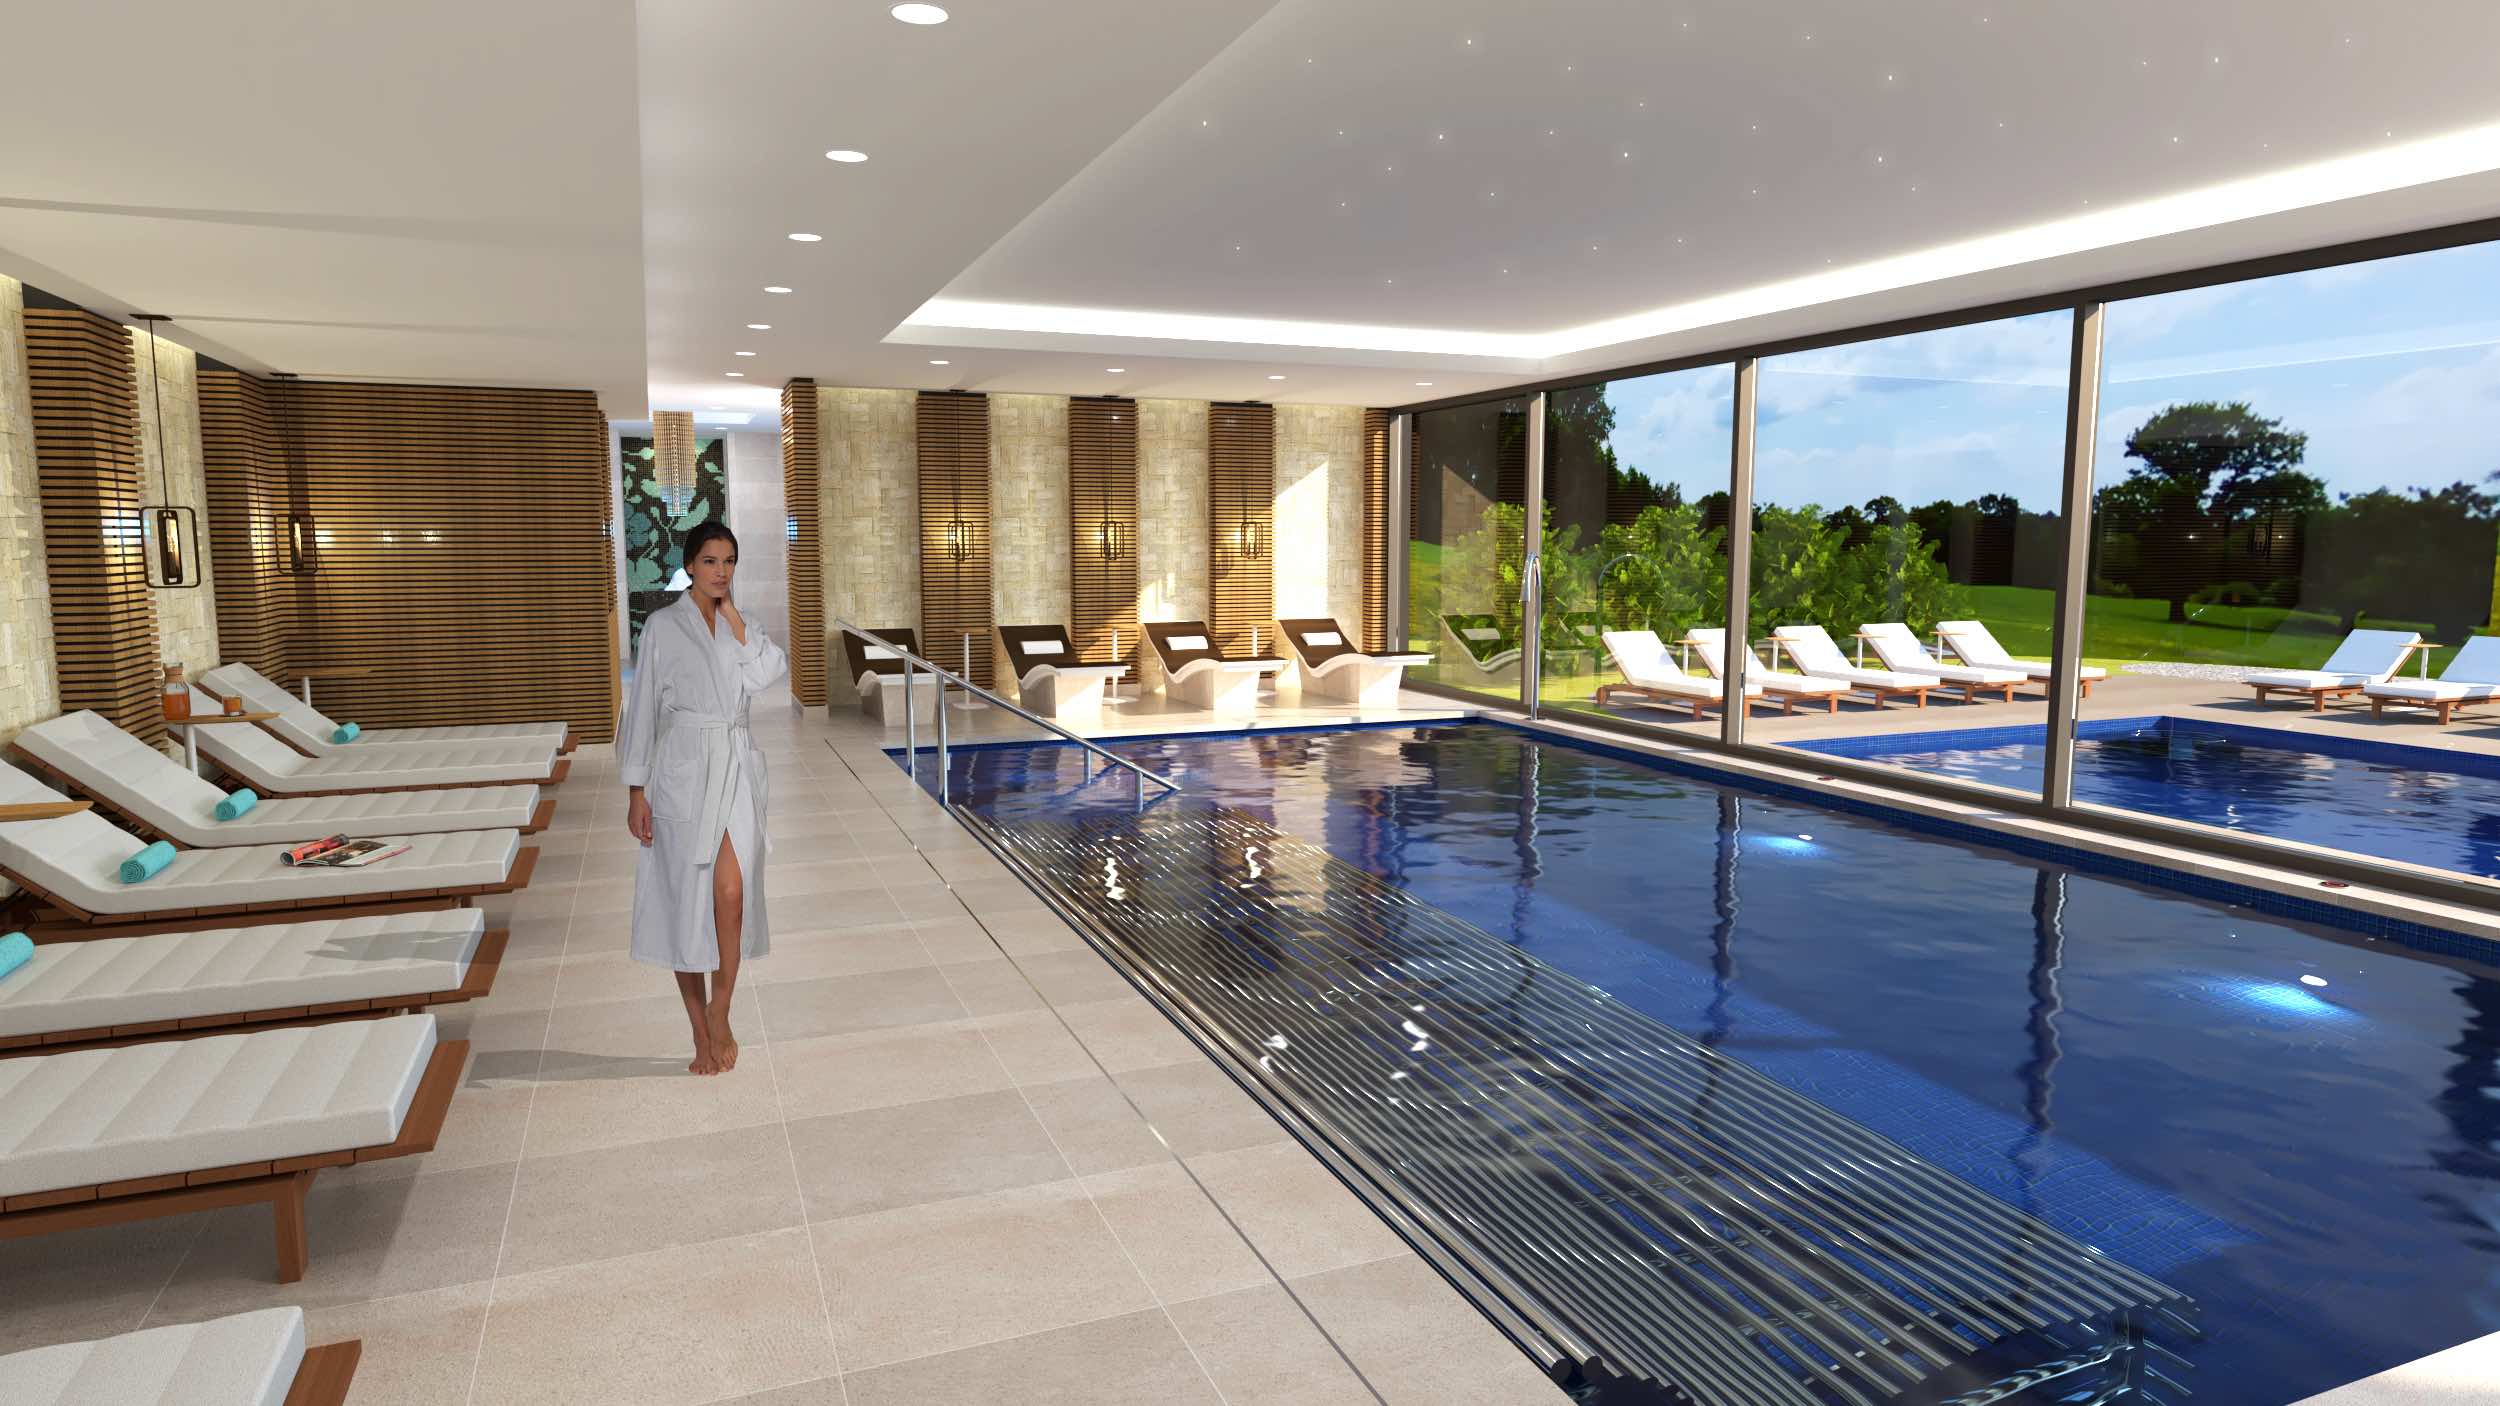 The Spa at Carden pool area